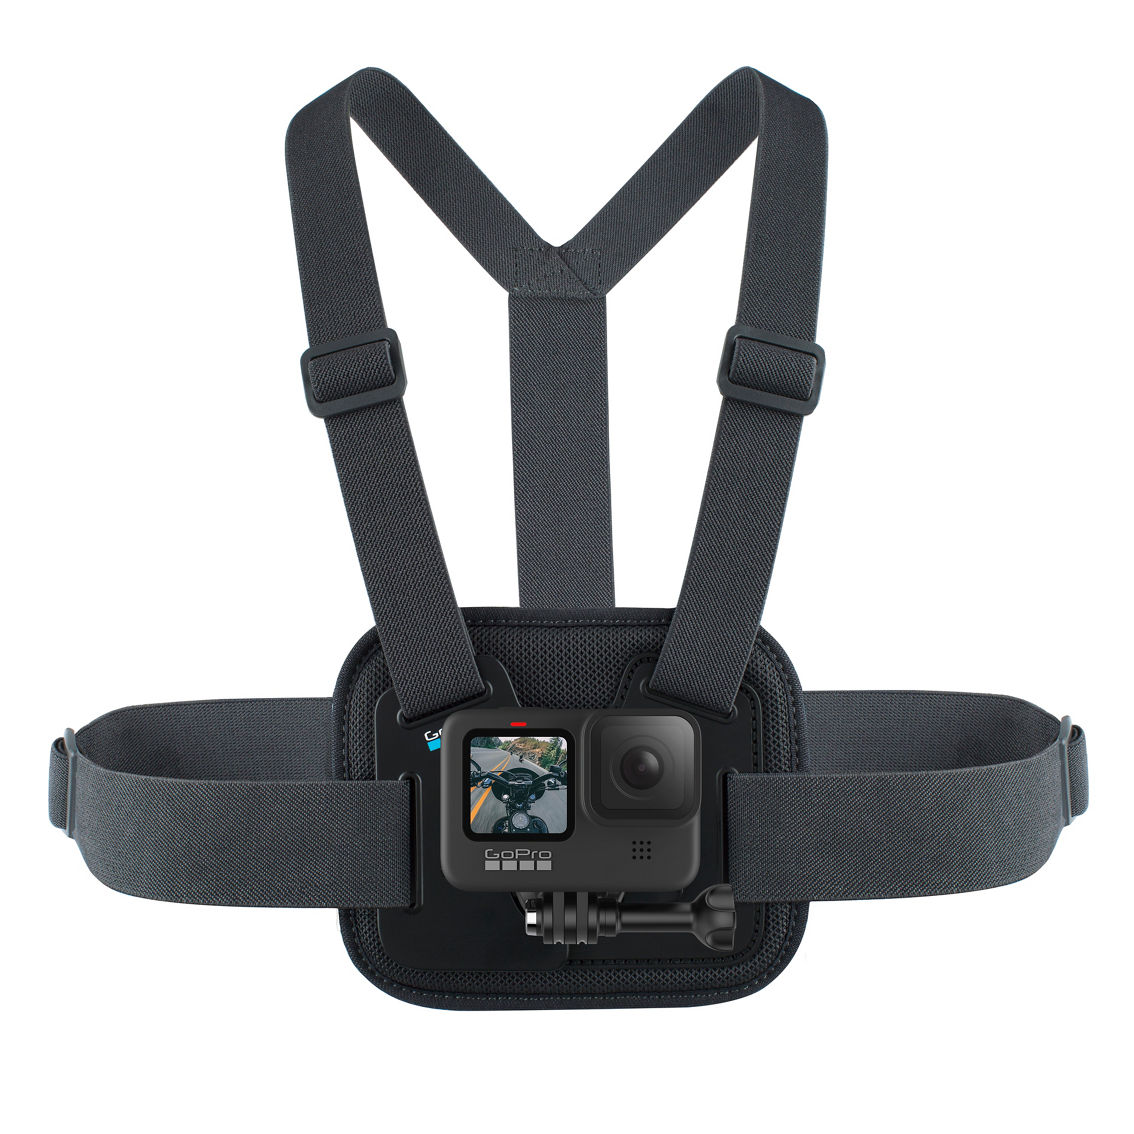 GoPro Chest Mount Camera Harness works with all GoPro camera's